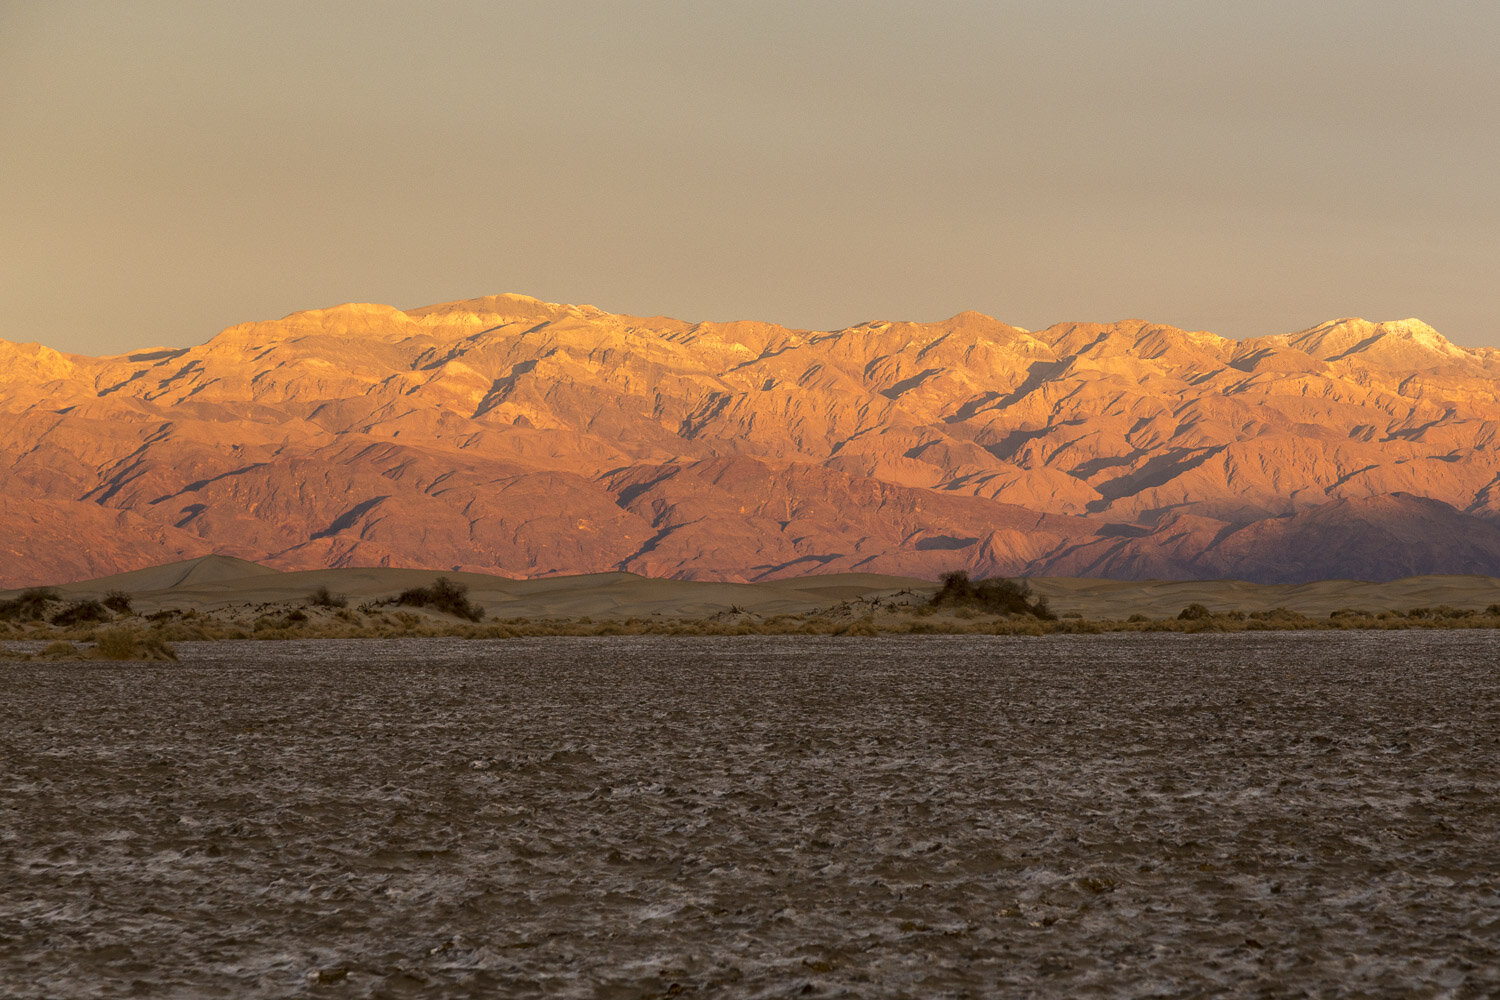 sunrise_over_mountains_panamint_dunes_death_valley.jpg